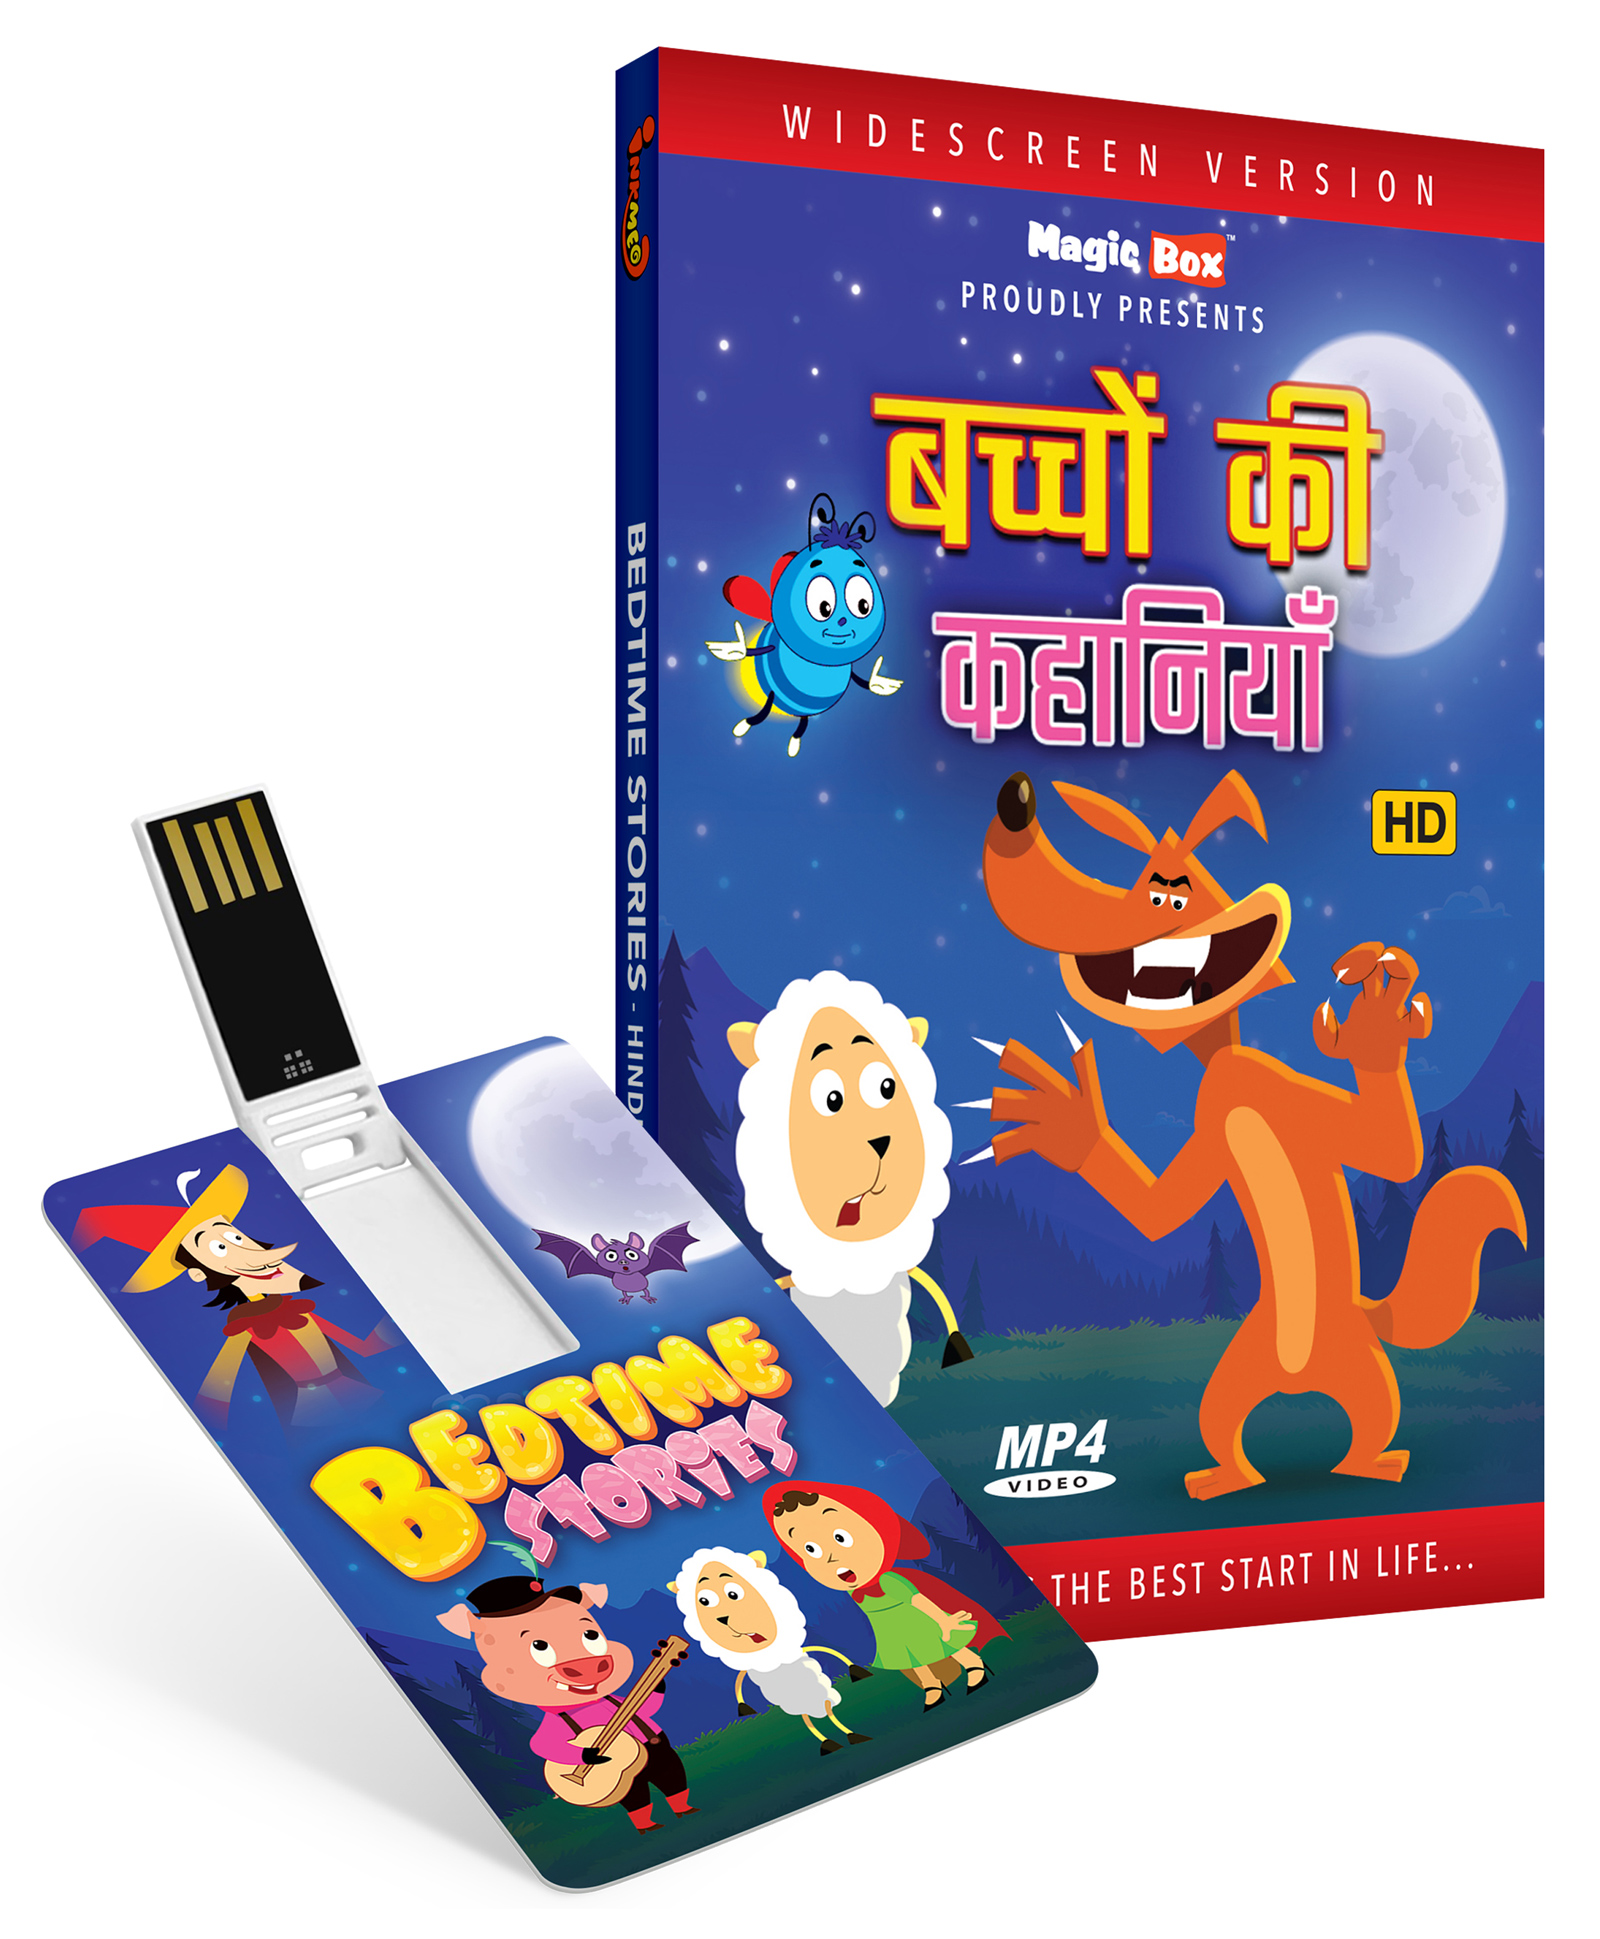 Inkmeo Movie Card Bedtime Stories 8GB High Definition MP4 Video USB Memory  Stick - Hindi Online in India, Buy at Best Price from  - 8476788